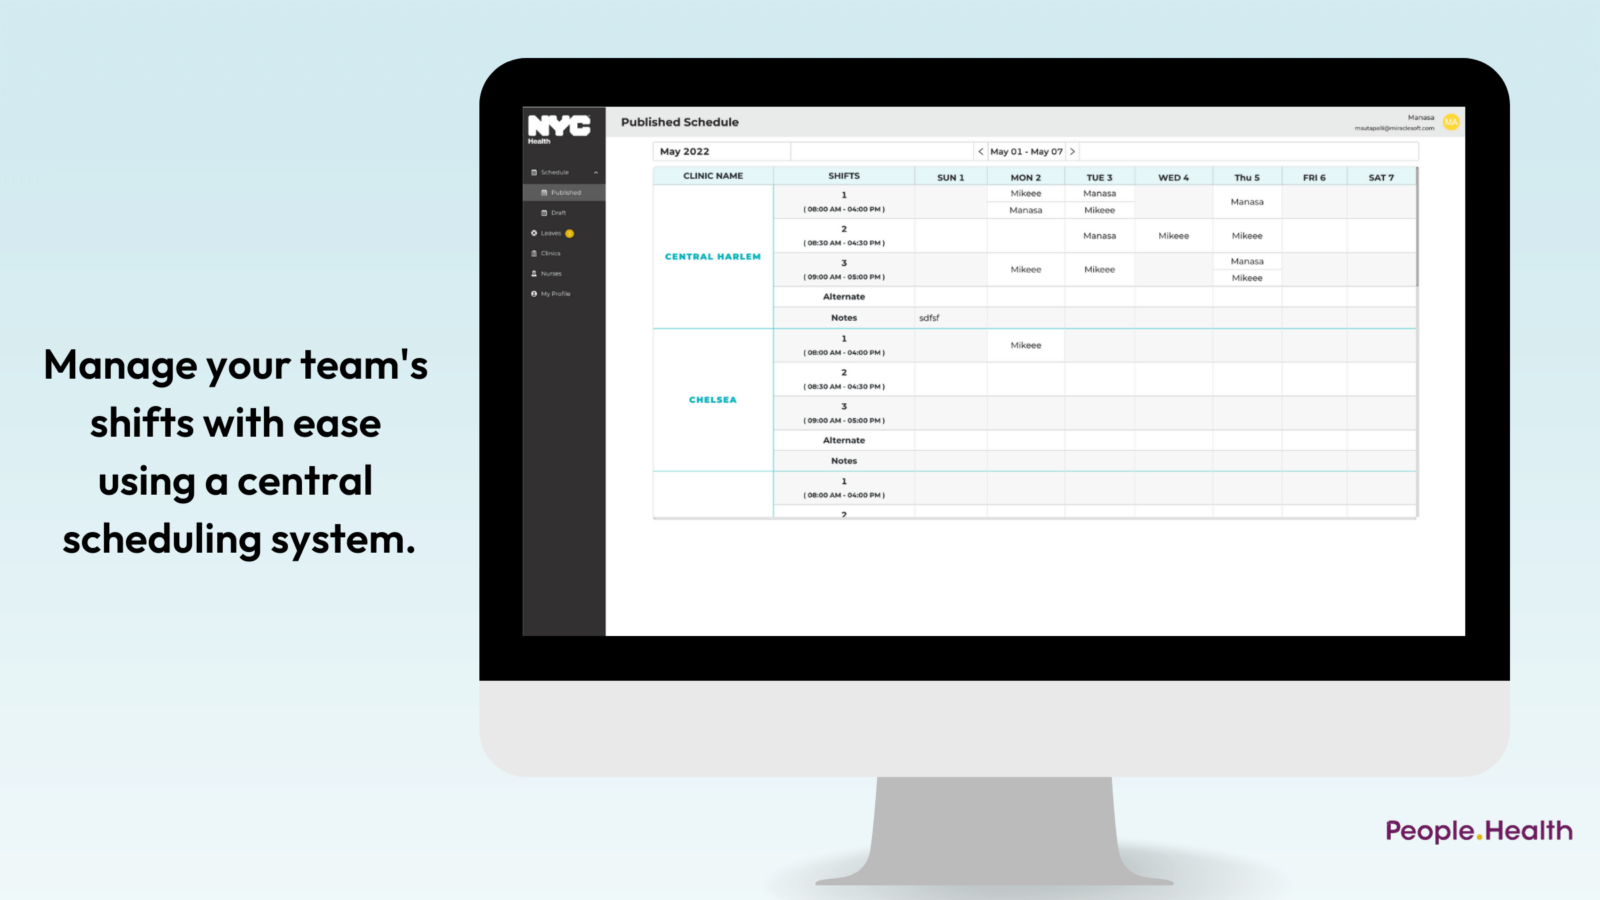 Manage your team's shifts with ease using a central scheduling system.